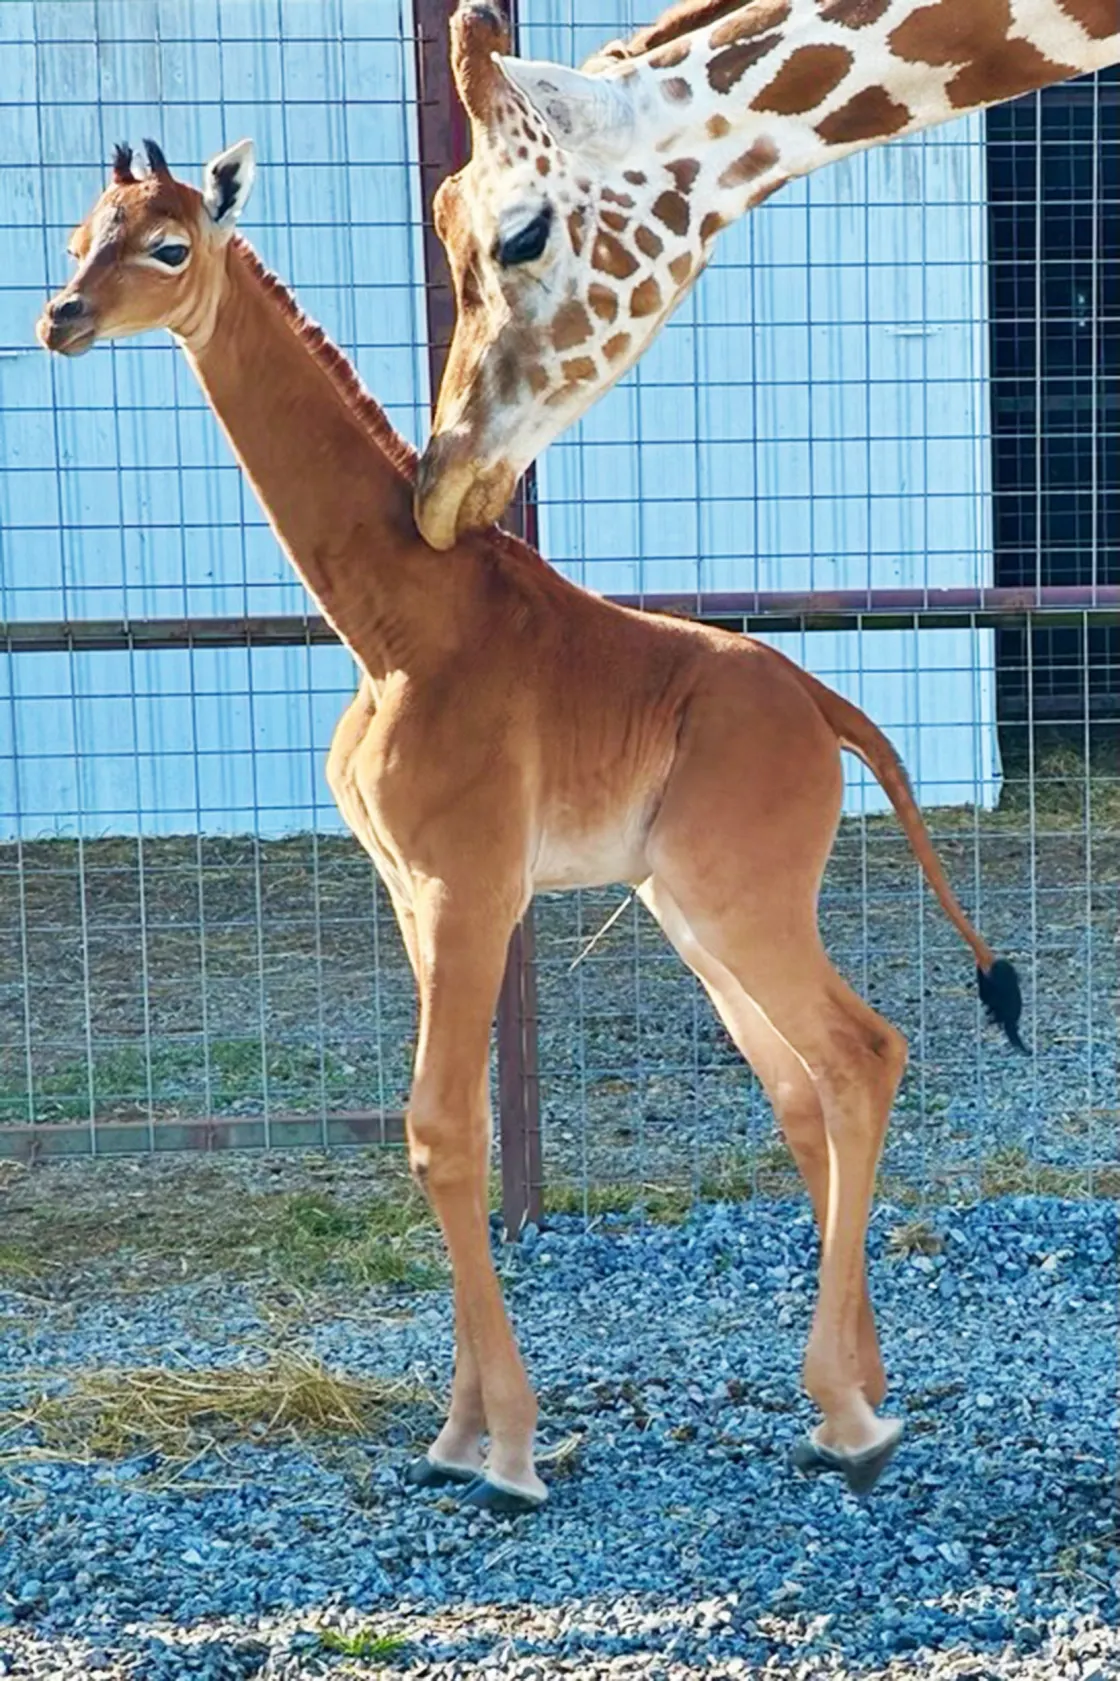 Rare solid-colored giraffe born at Brights Zoo sparks global conservation concern 